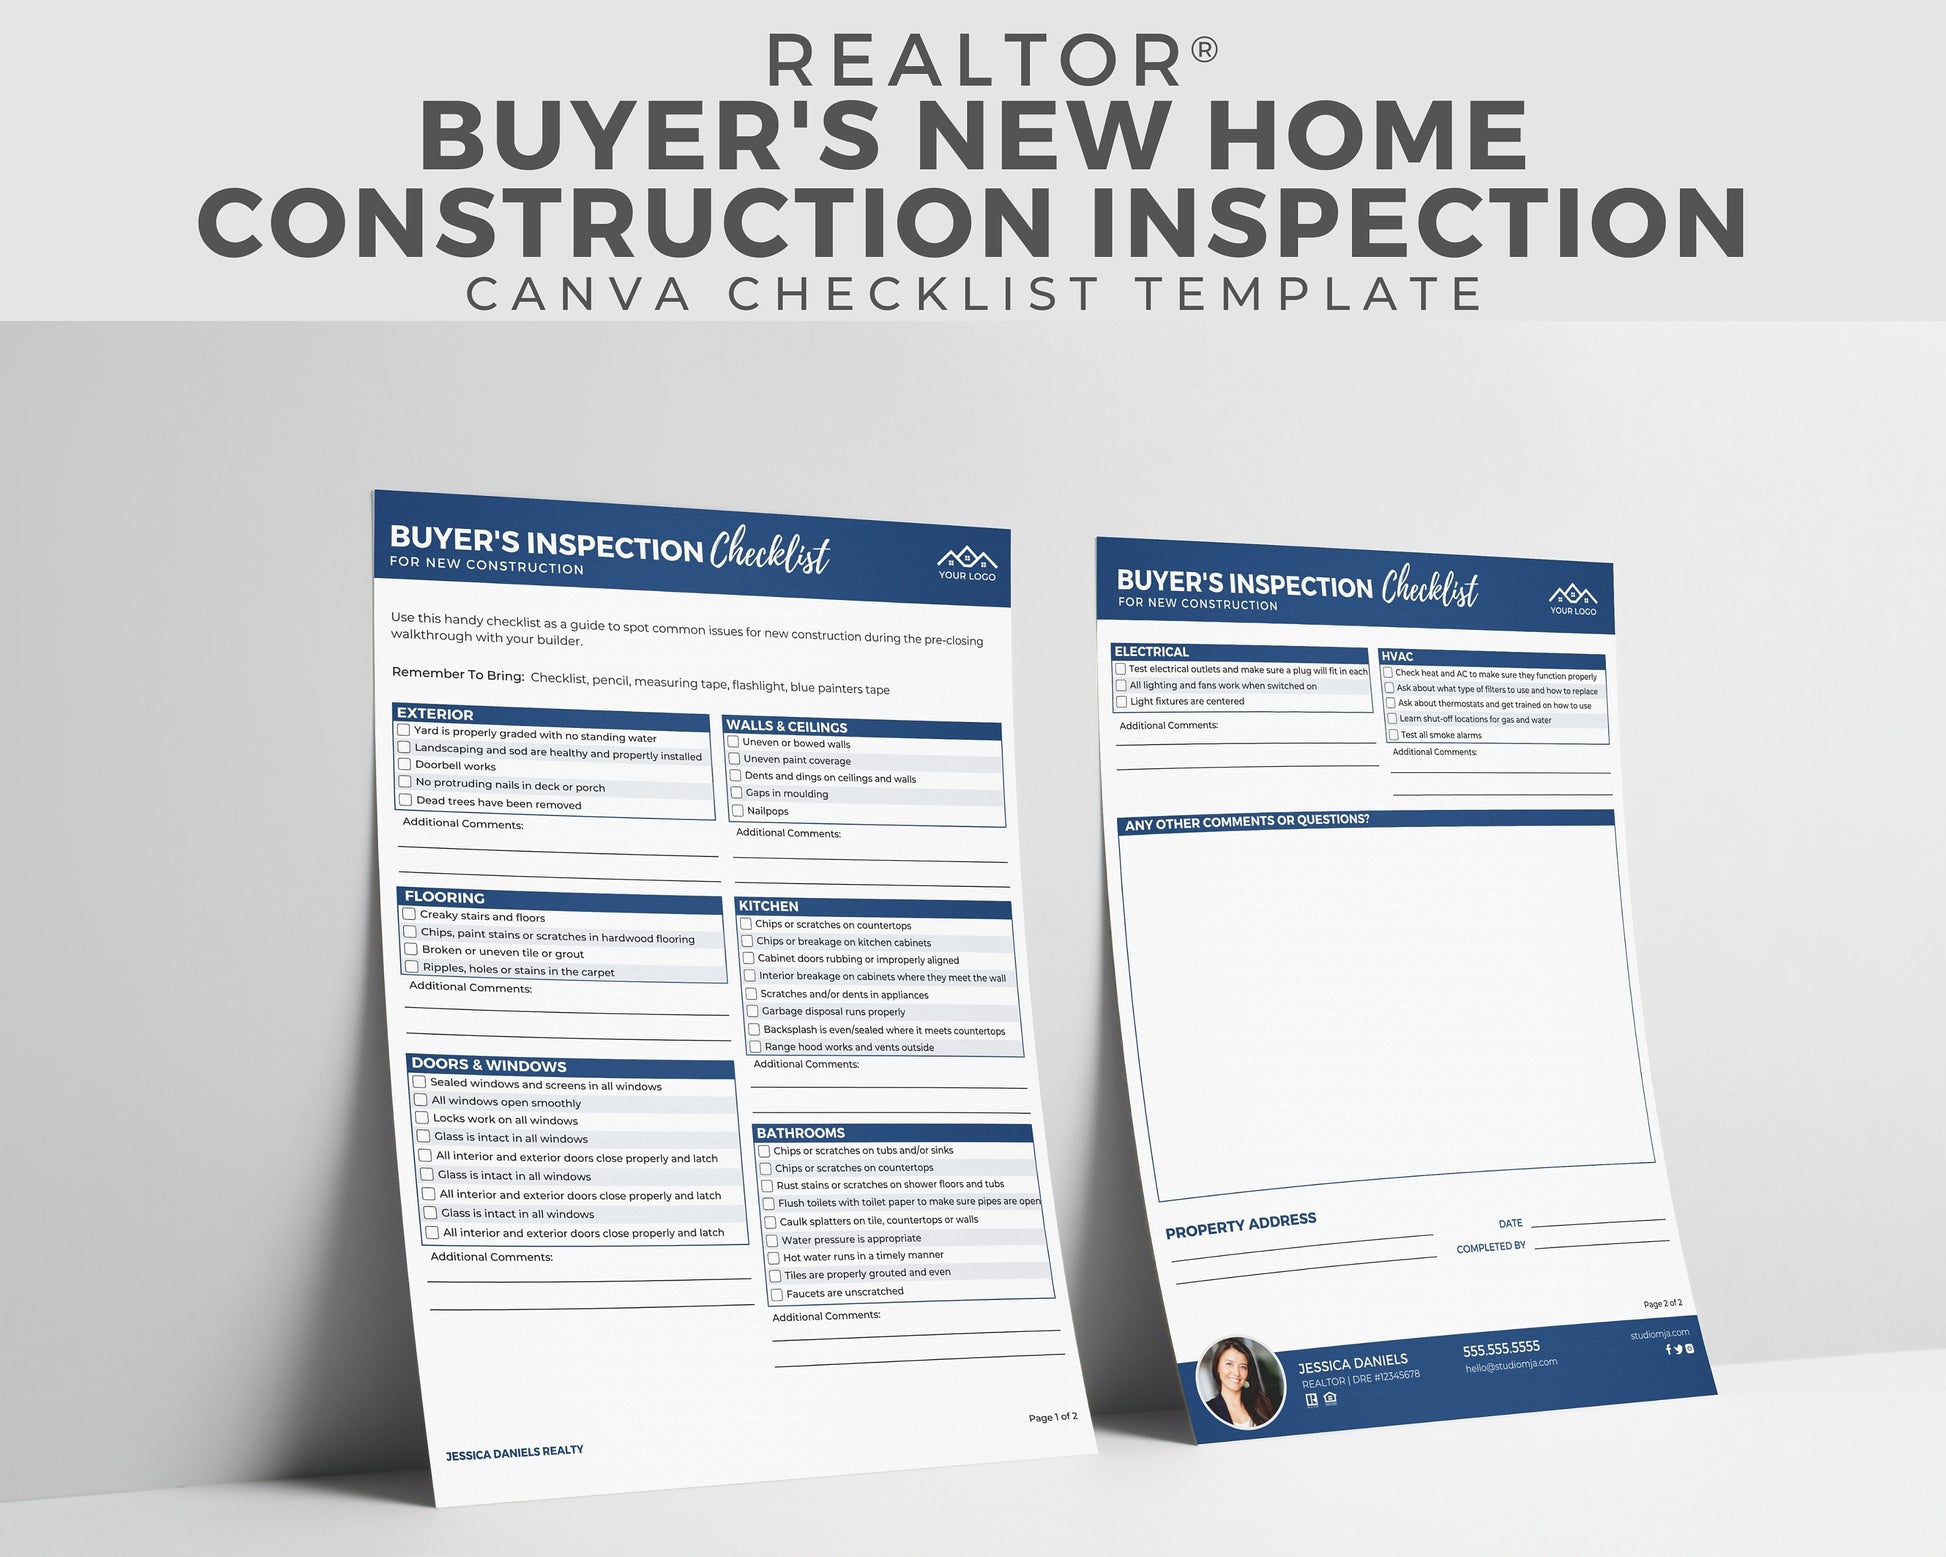 Real Estate Buyer New Construction Inspection Checklist, Real Estate Marketing, Printable Checklist, Buyer Packet, Canva Template, Realtor